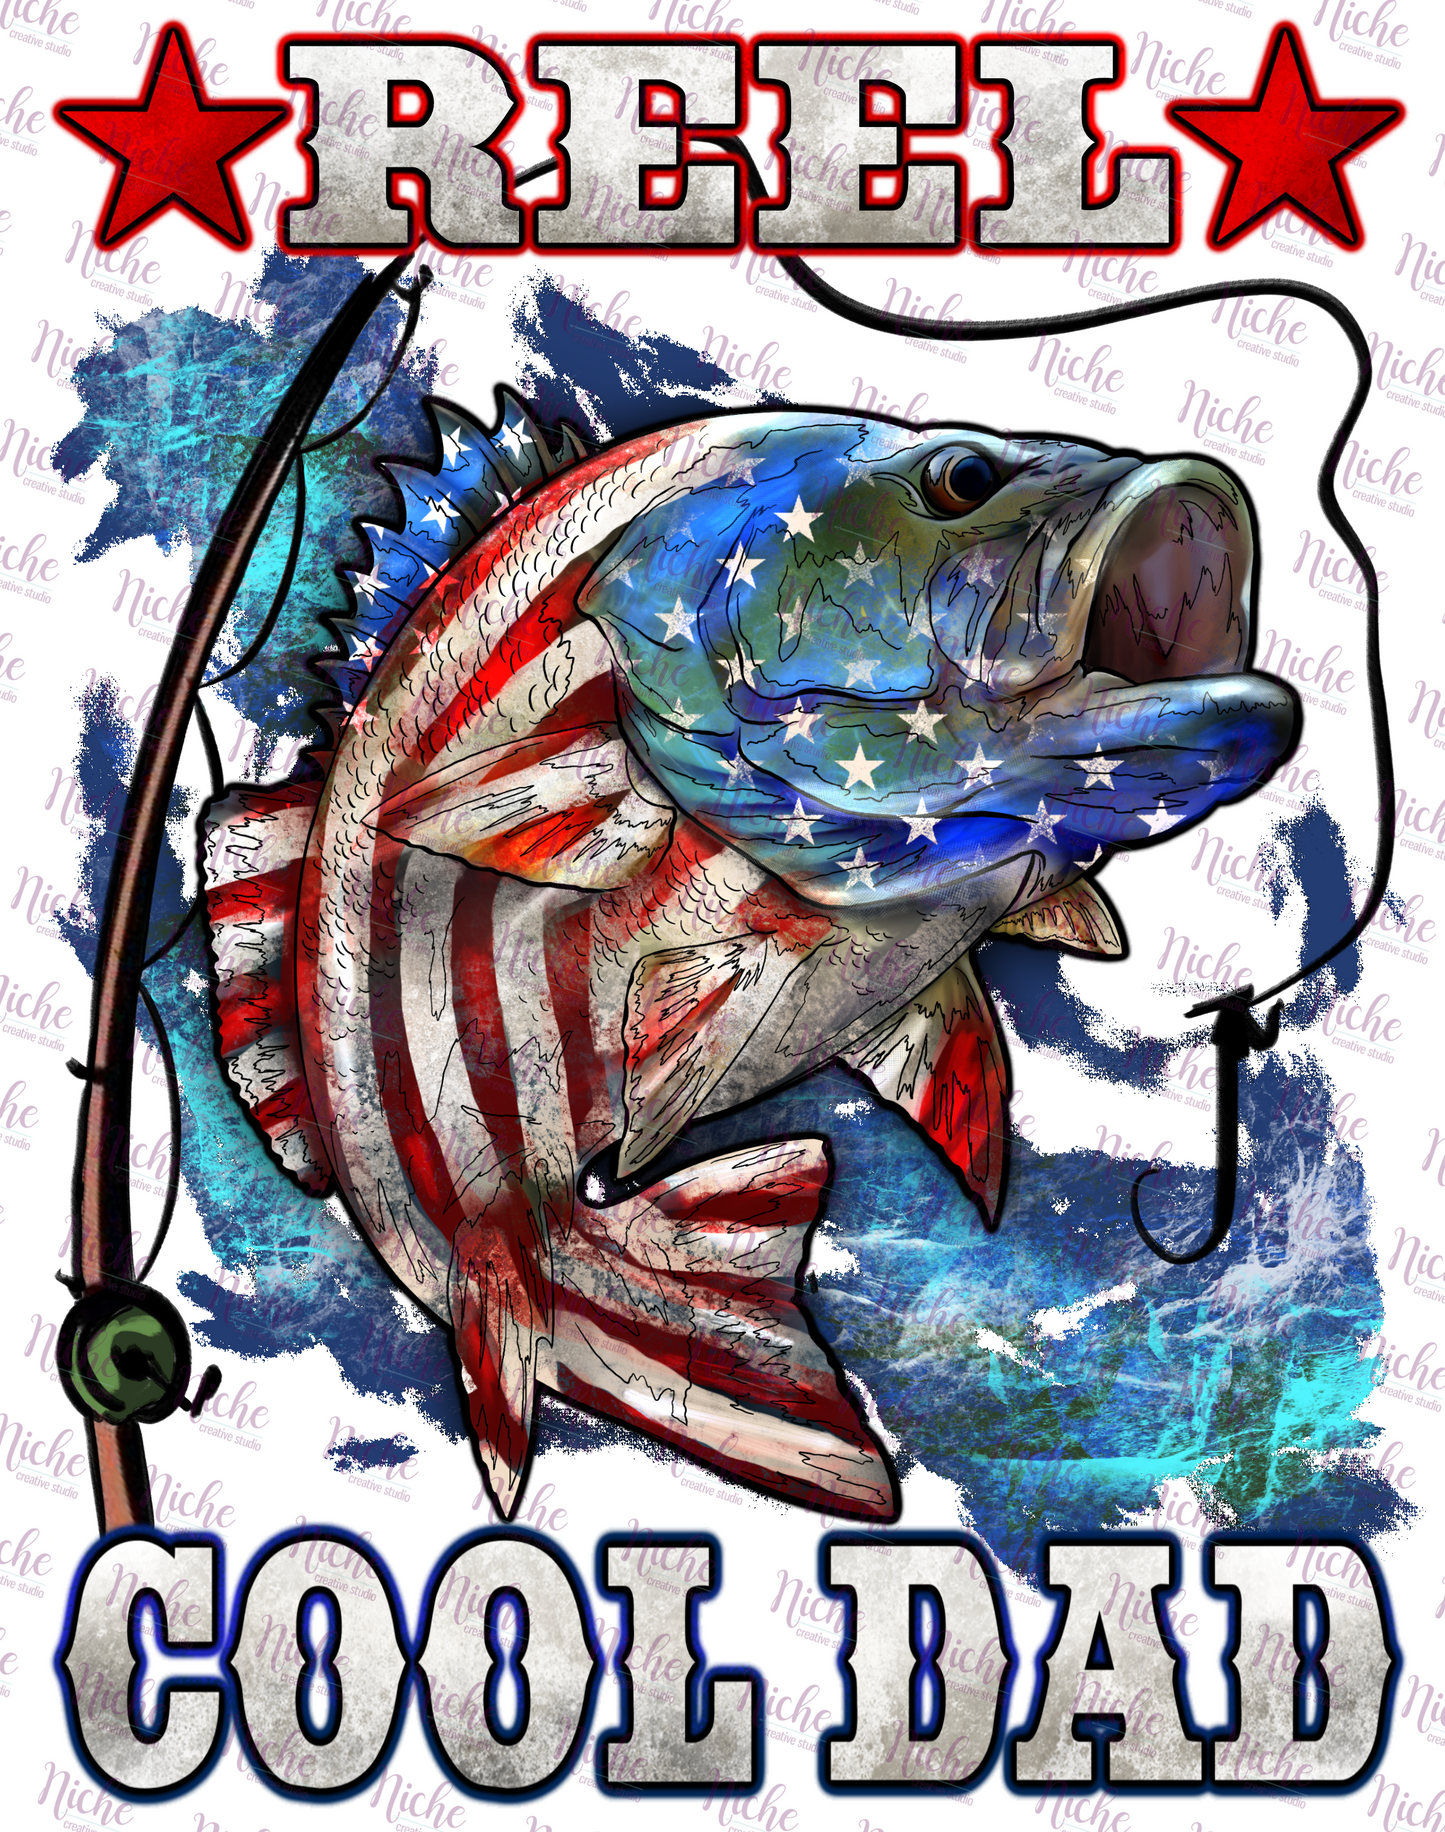 - DAD201 Reel Cool Dad Bass Decal